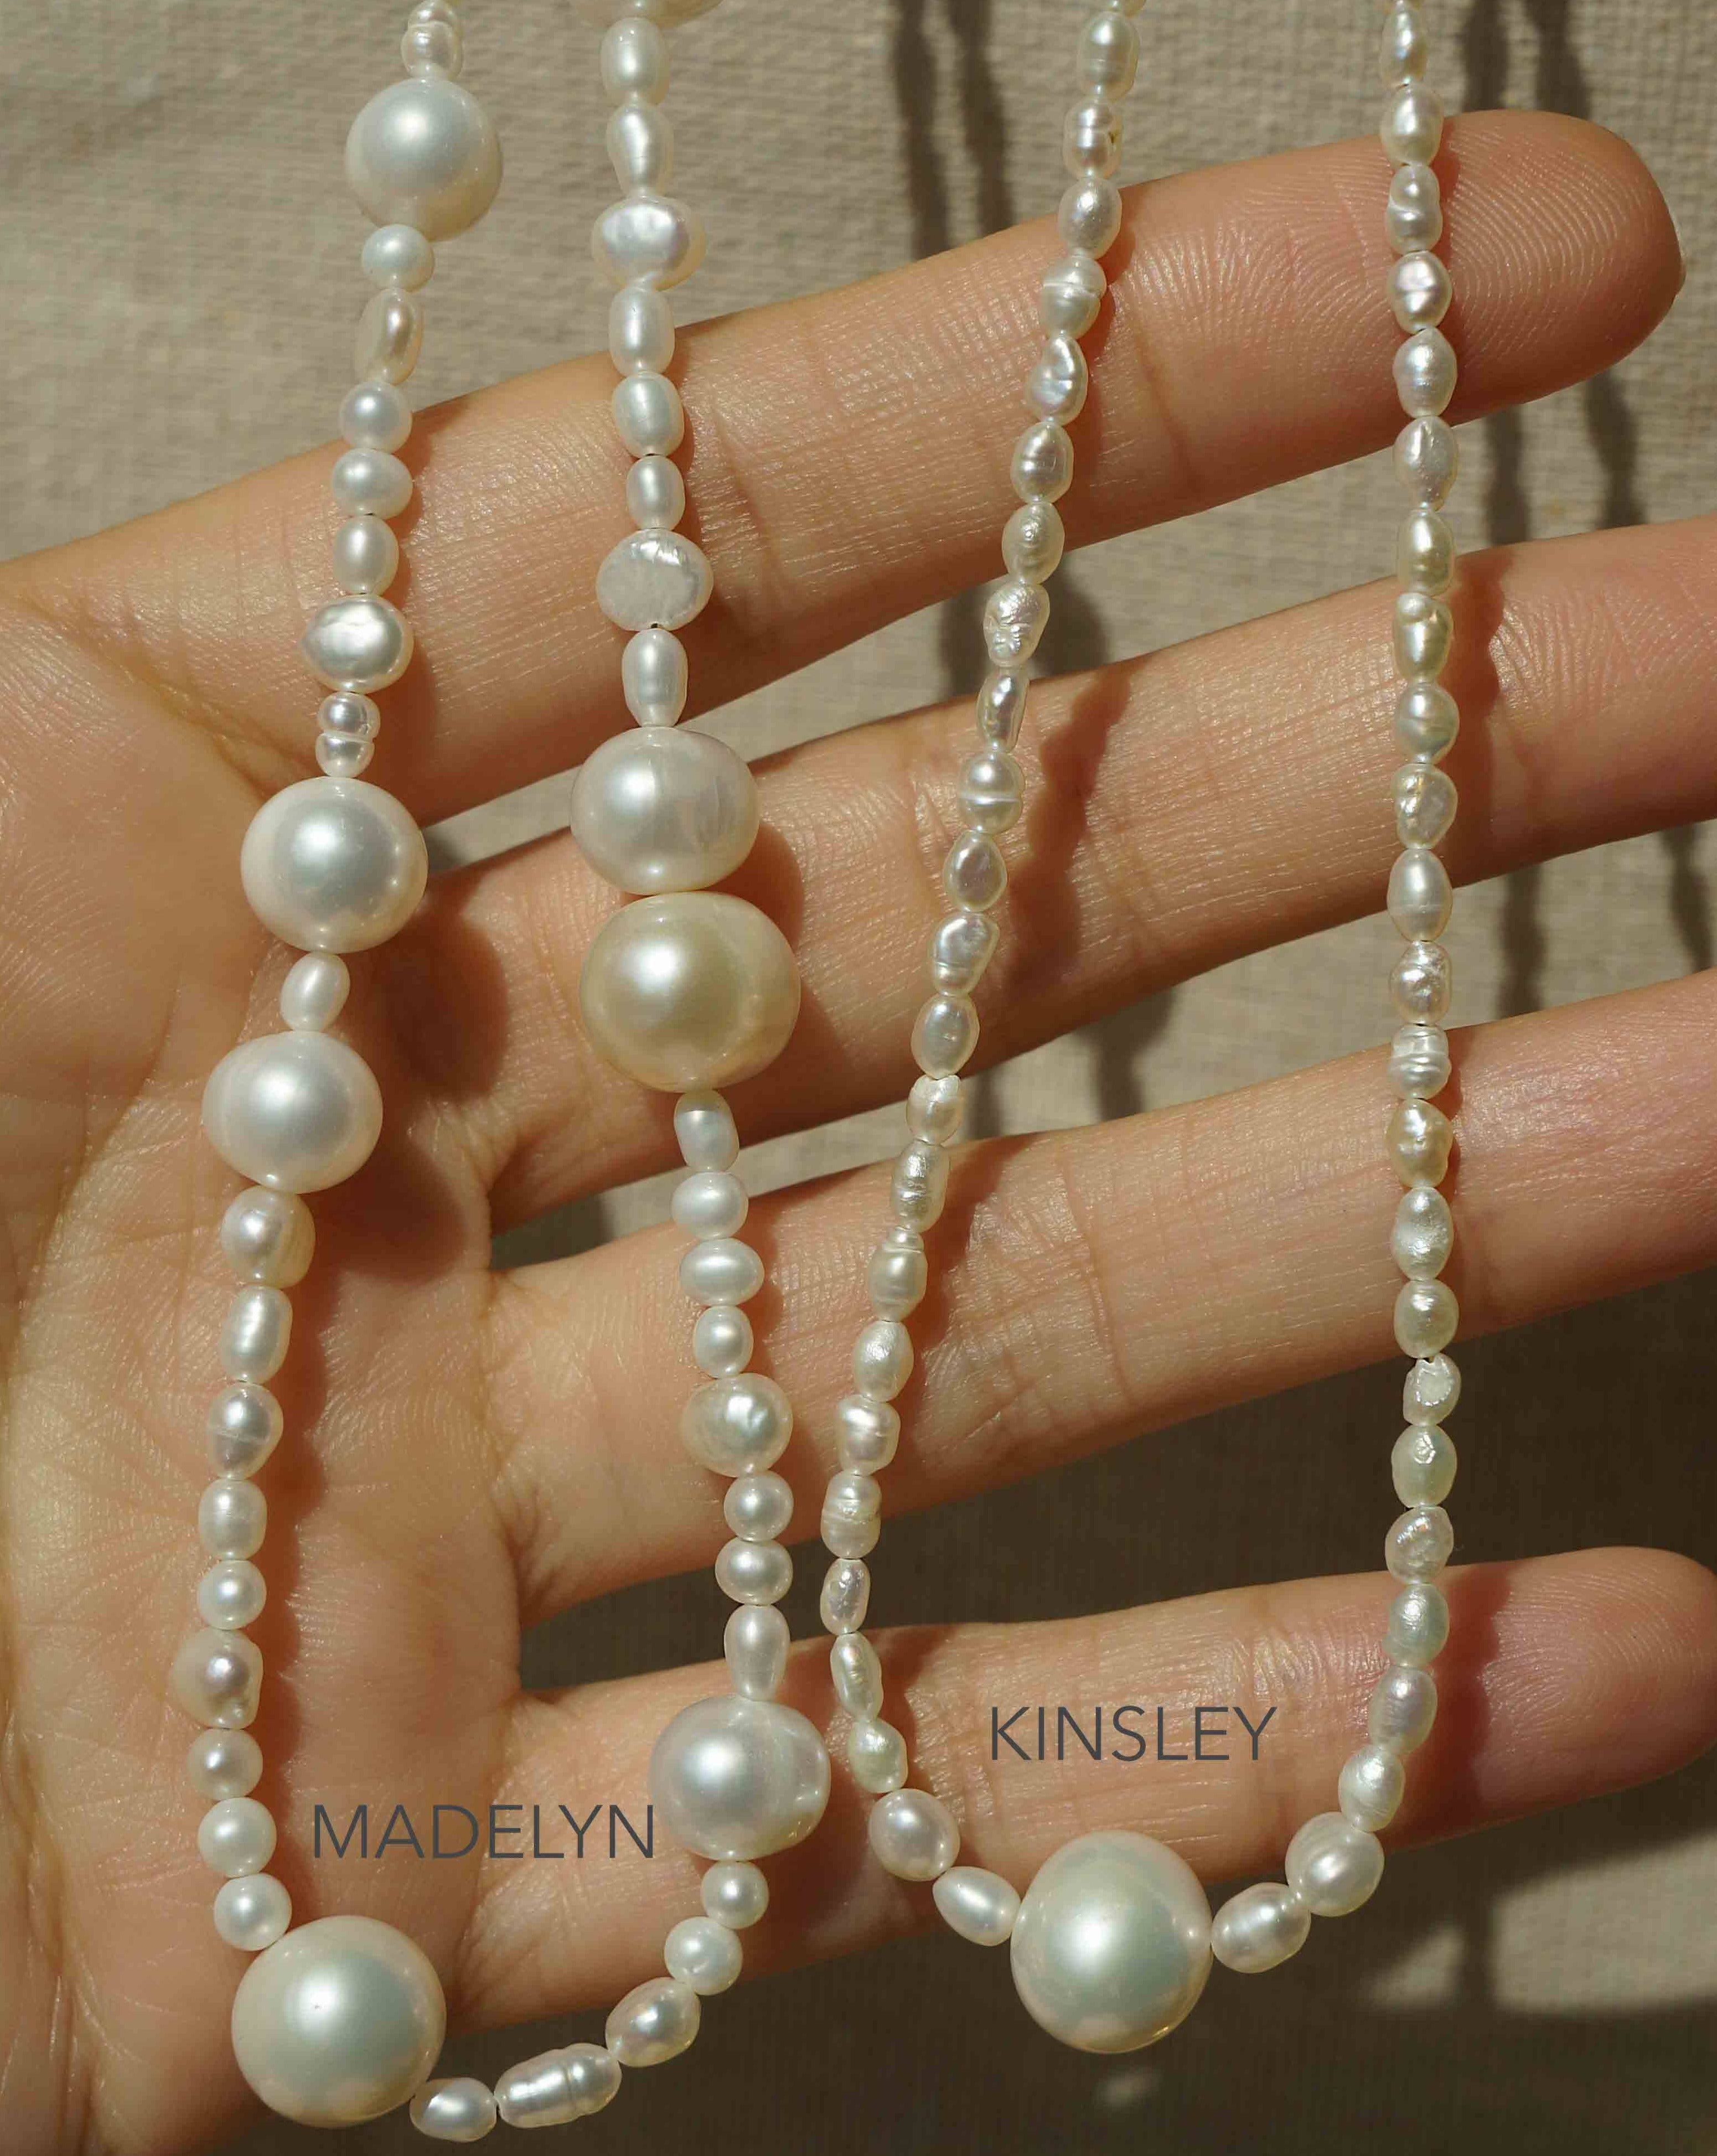 Kinsley Necklace by KOZAKH. A 14 to 16 inch adjustable length, Freshwater Pearls beaded necklace with 14K Gold Filled clasp.